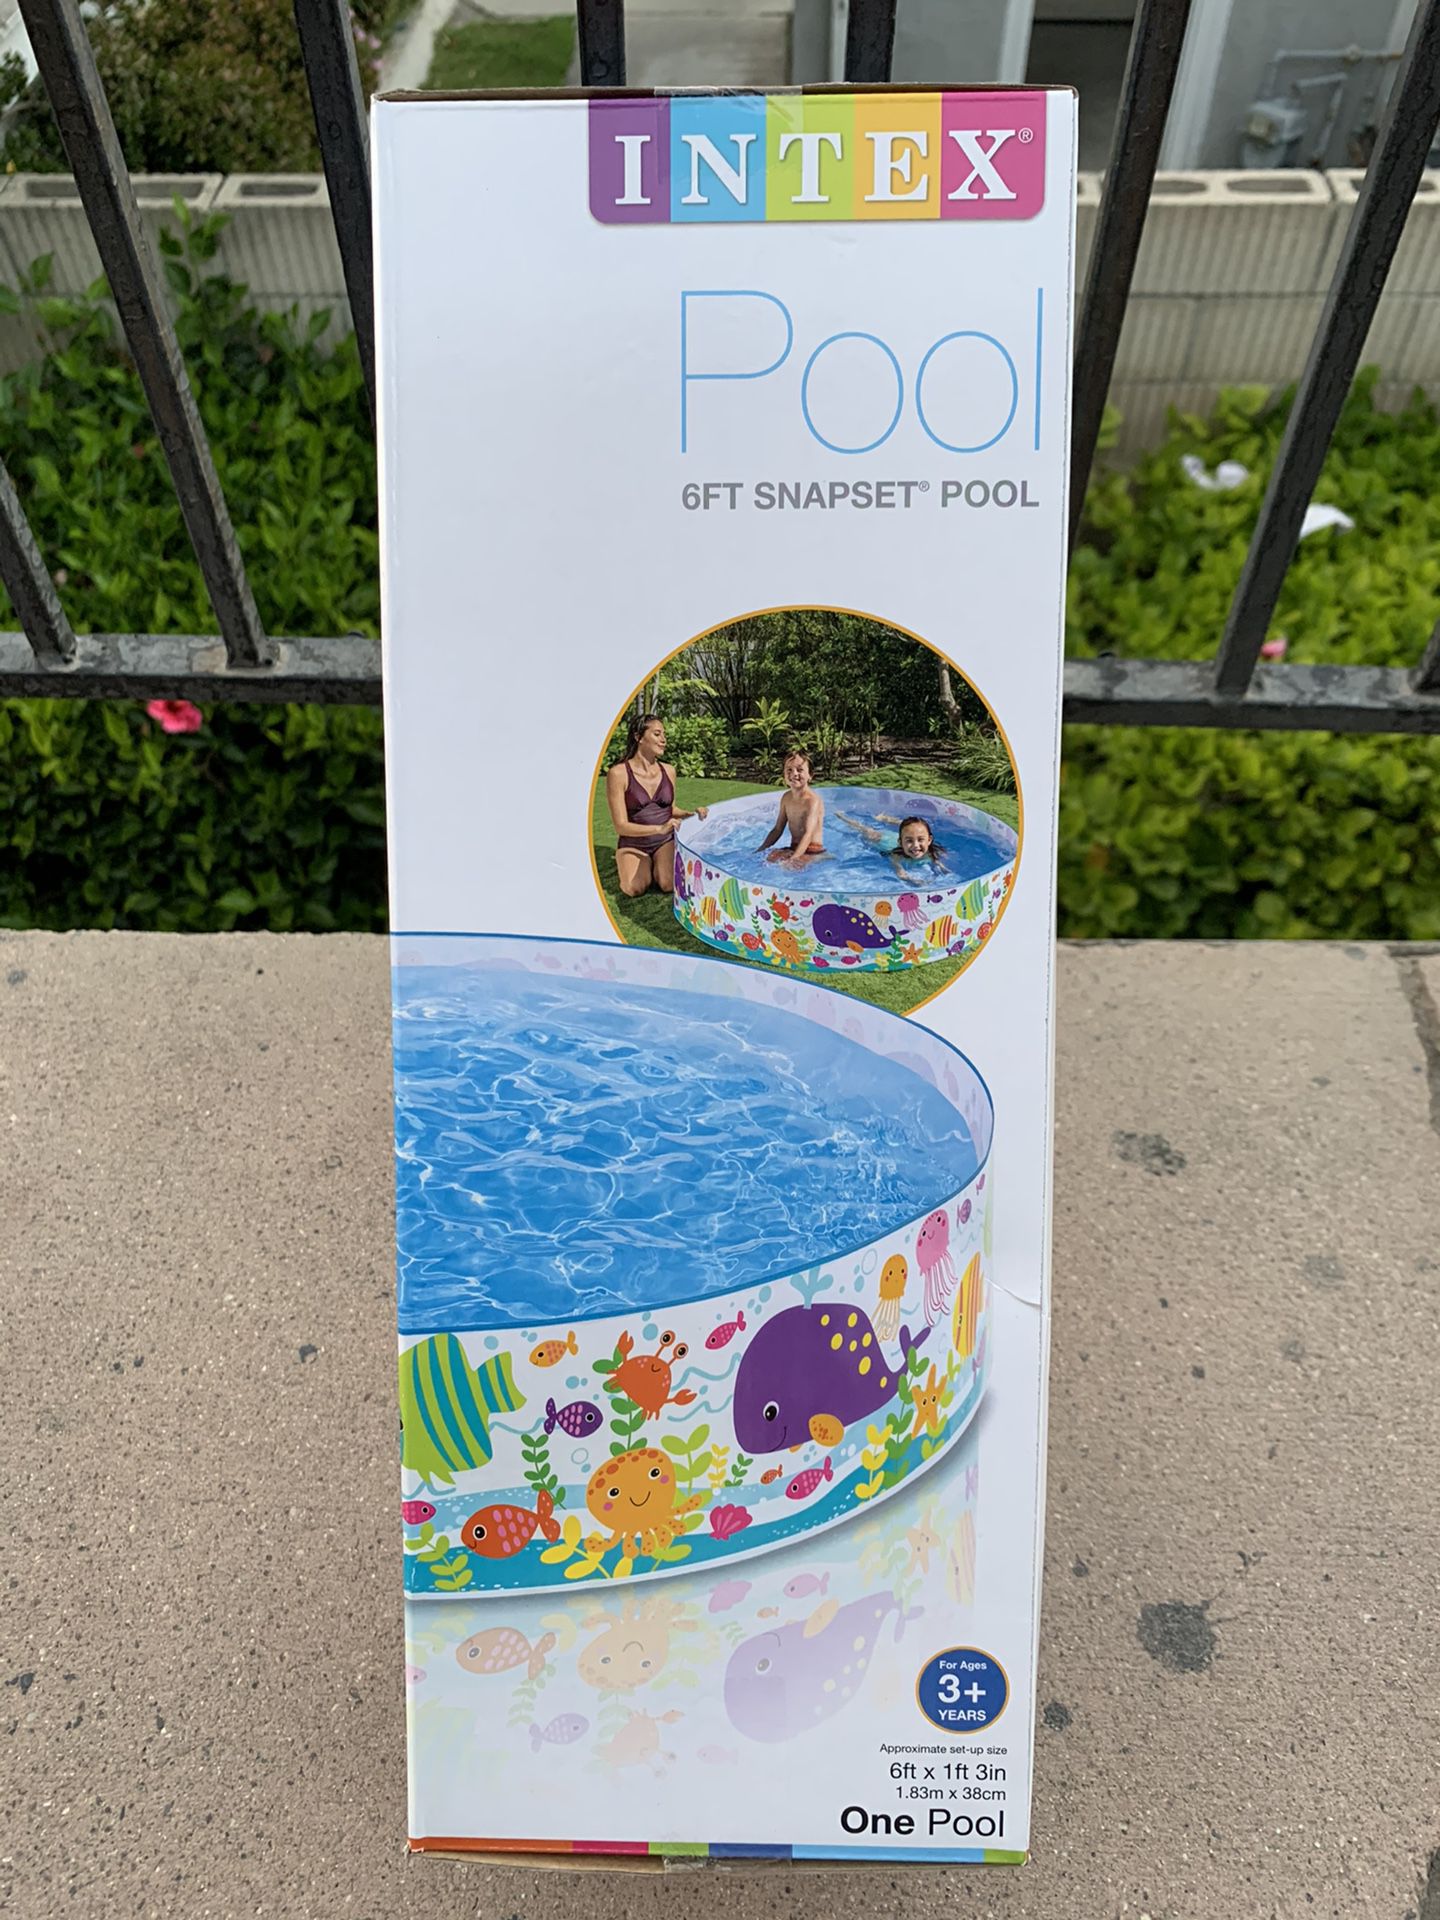 New pool 6ft wide brand new $30 each easy Snapset pool new in box